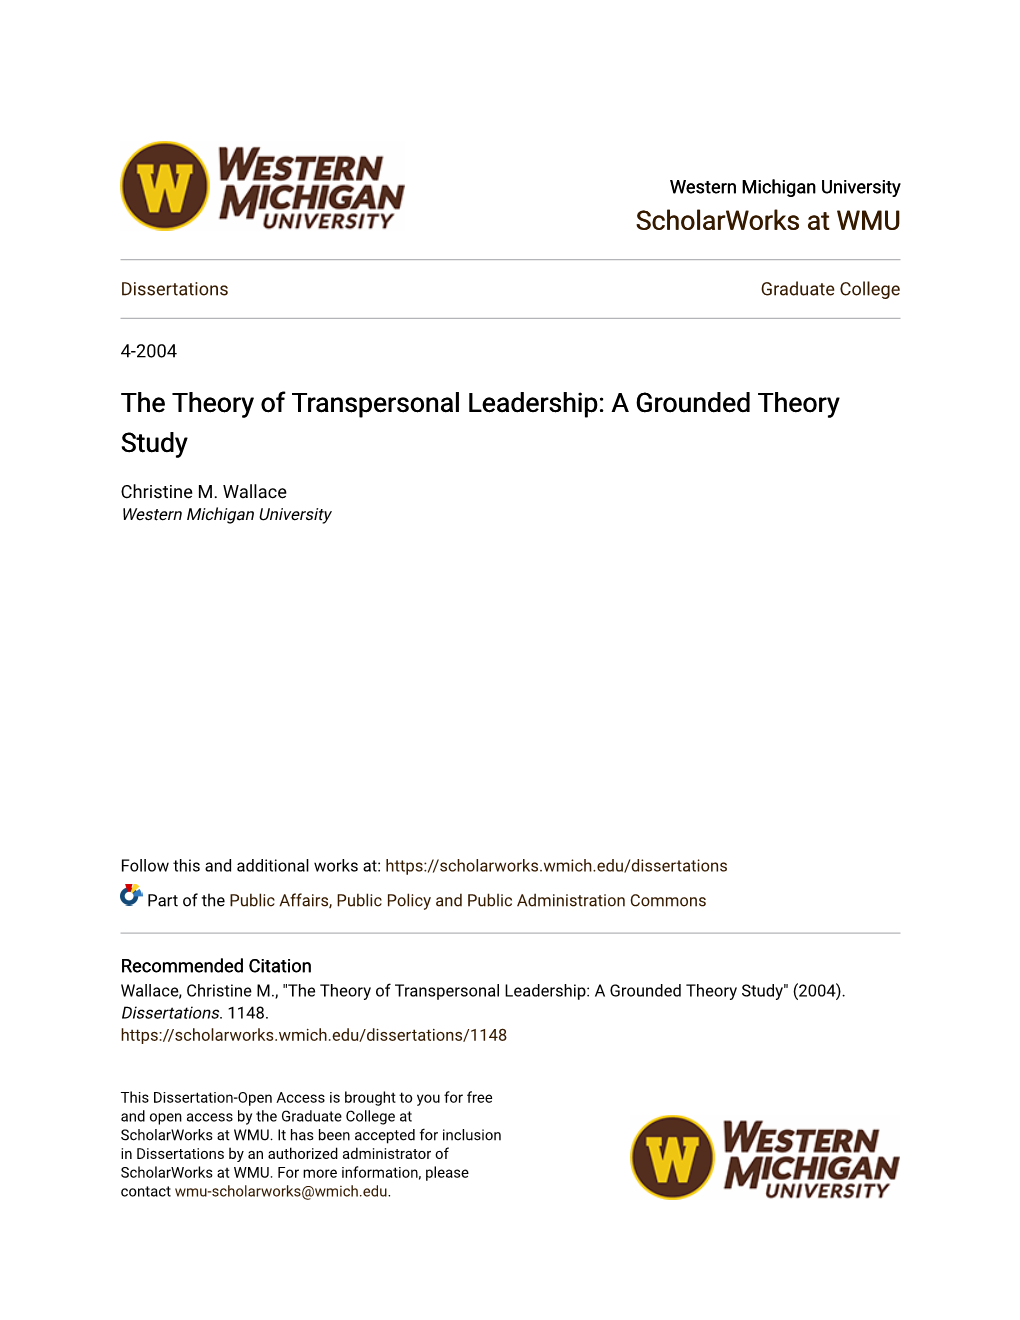 The Theory of Transpersonal Leadership: a Grounded Theory Study